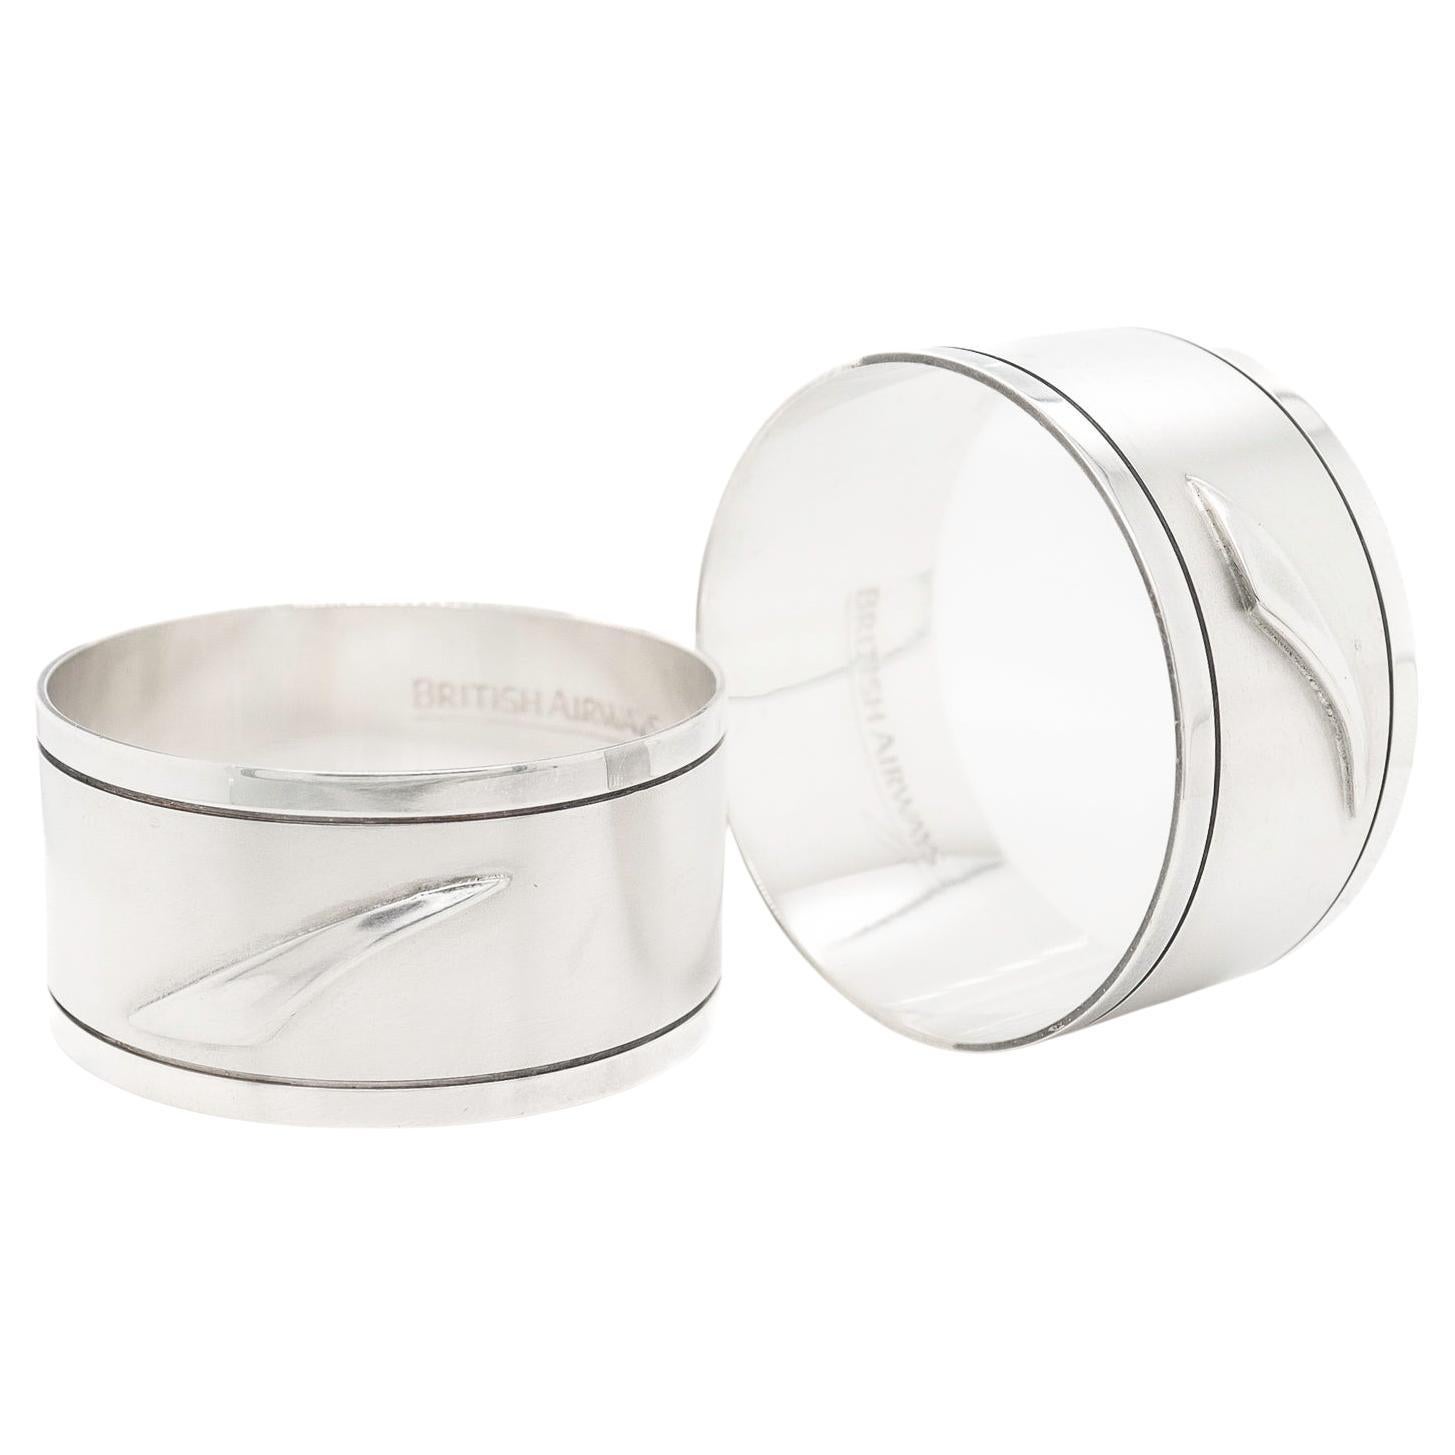 Pair British Airways Concorde Sterling Silver Napkin Rings in the Original Box For Sale